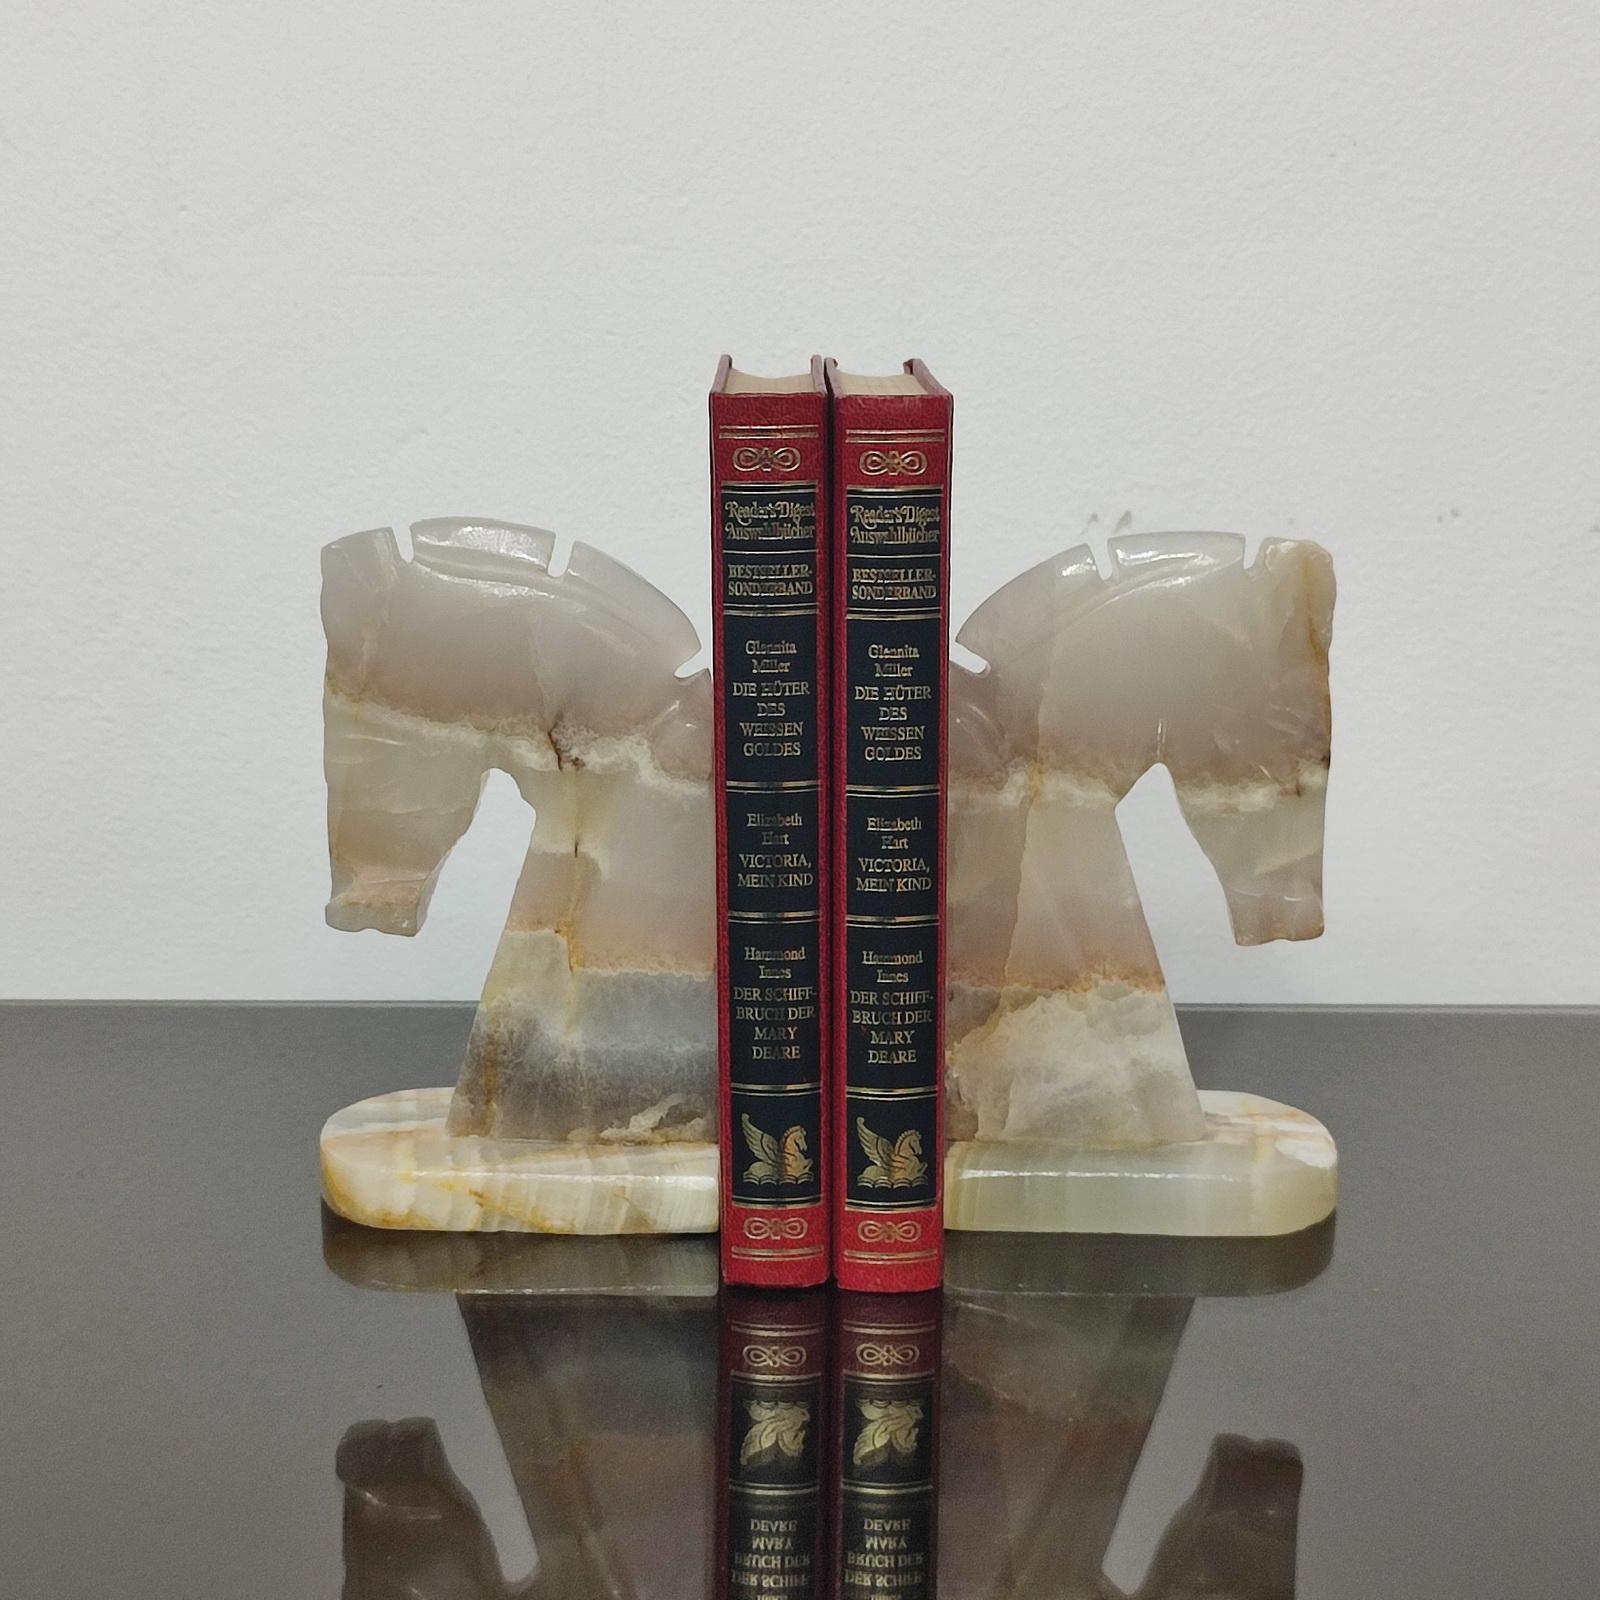 Mid-century era pair of handcrafted art deco style horse sculpture onyx bookends.
Geometric design, Art Deco shaped reminding of the chess pieces, this pair of bookends are cut from the same piece of onyx, see the veins continuing form the left one